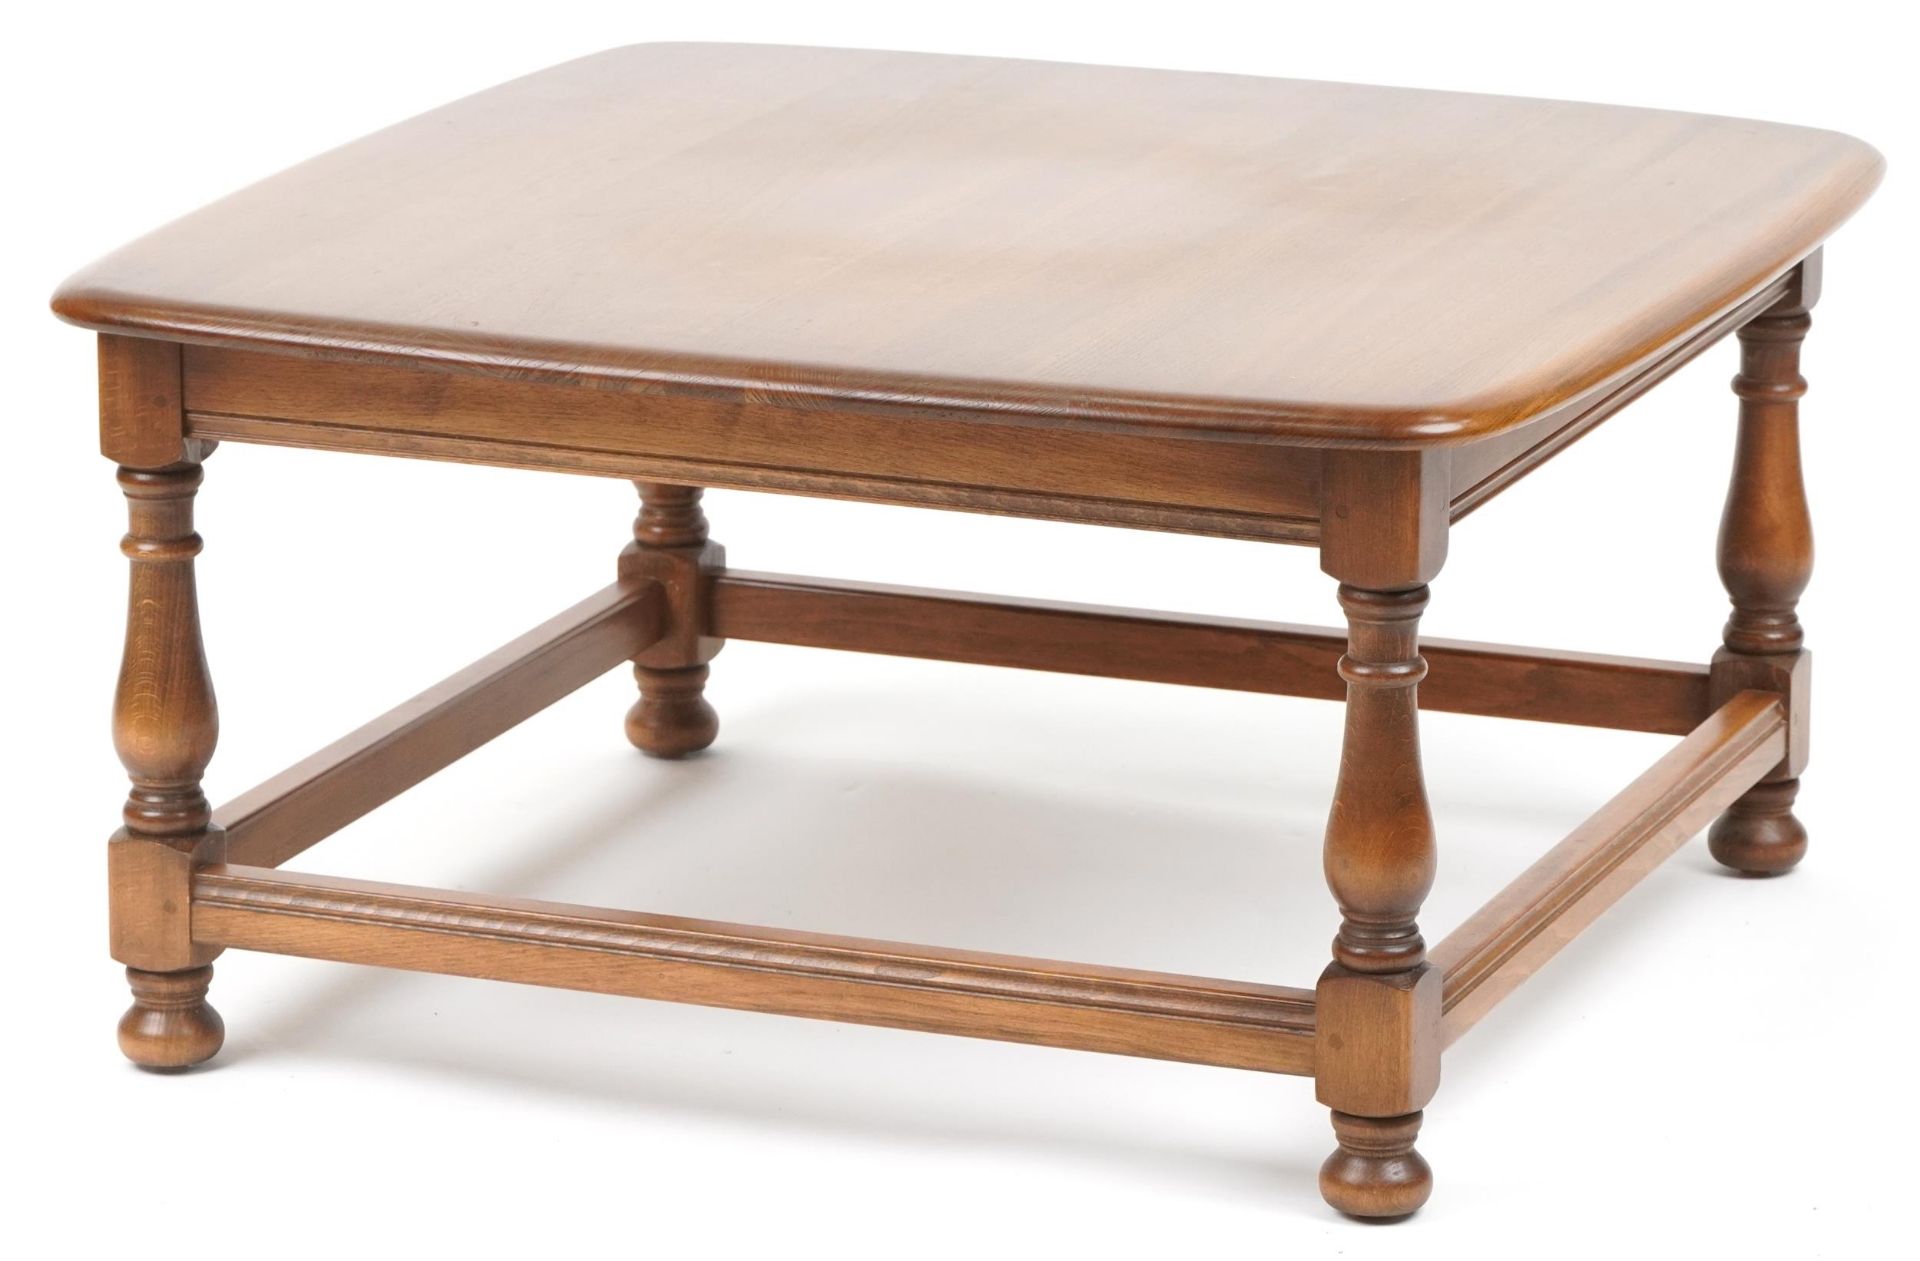 Ercol elm coffee table with square top, 38cm high x 75cm square